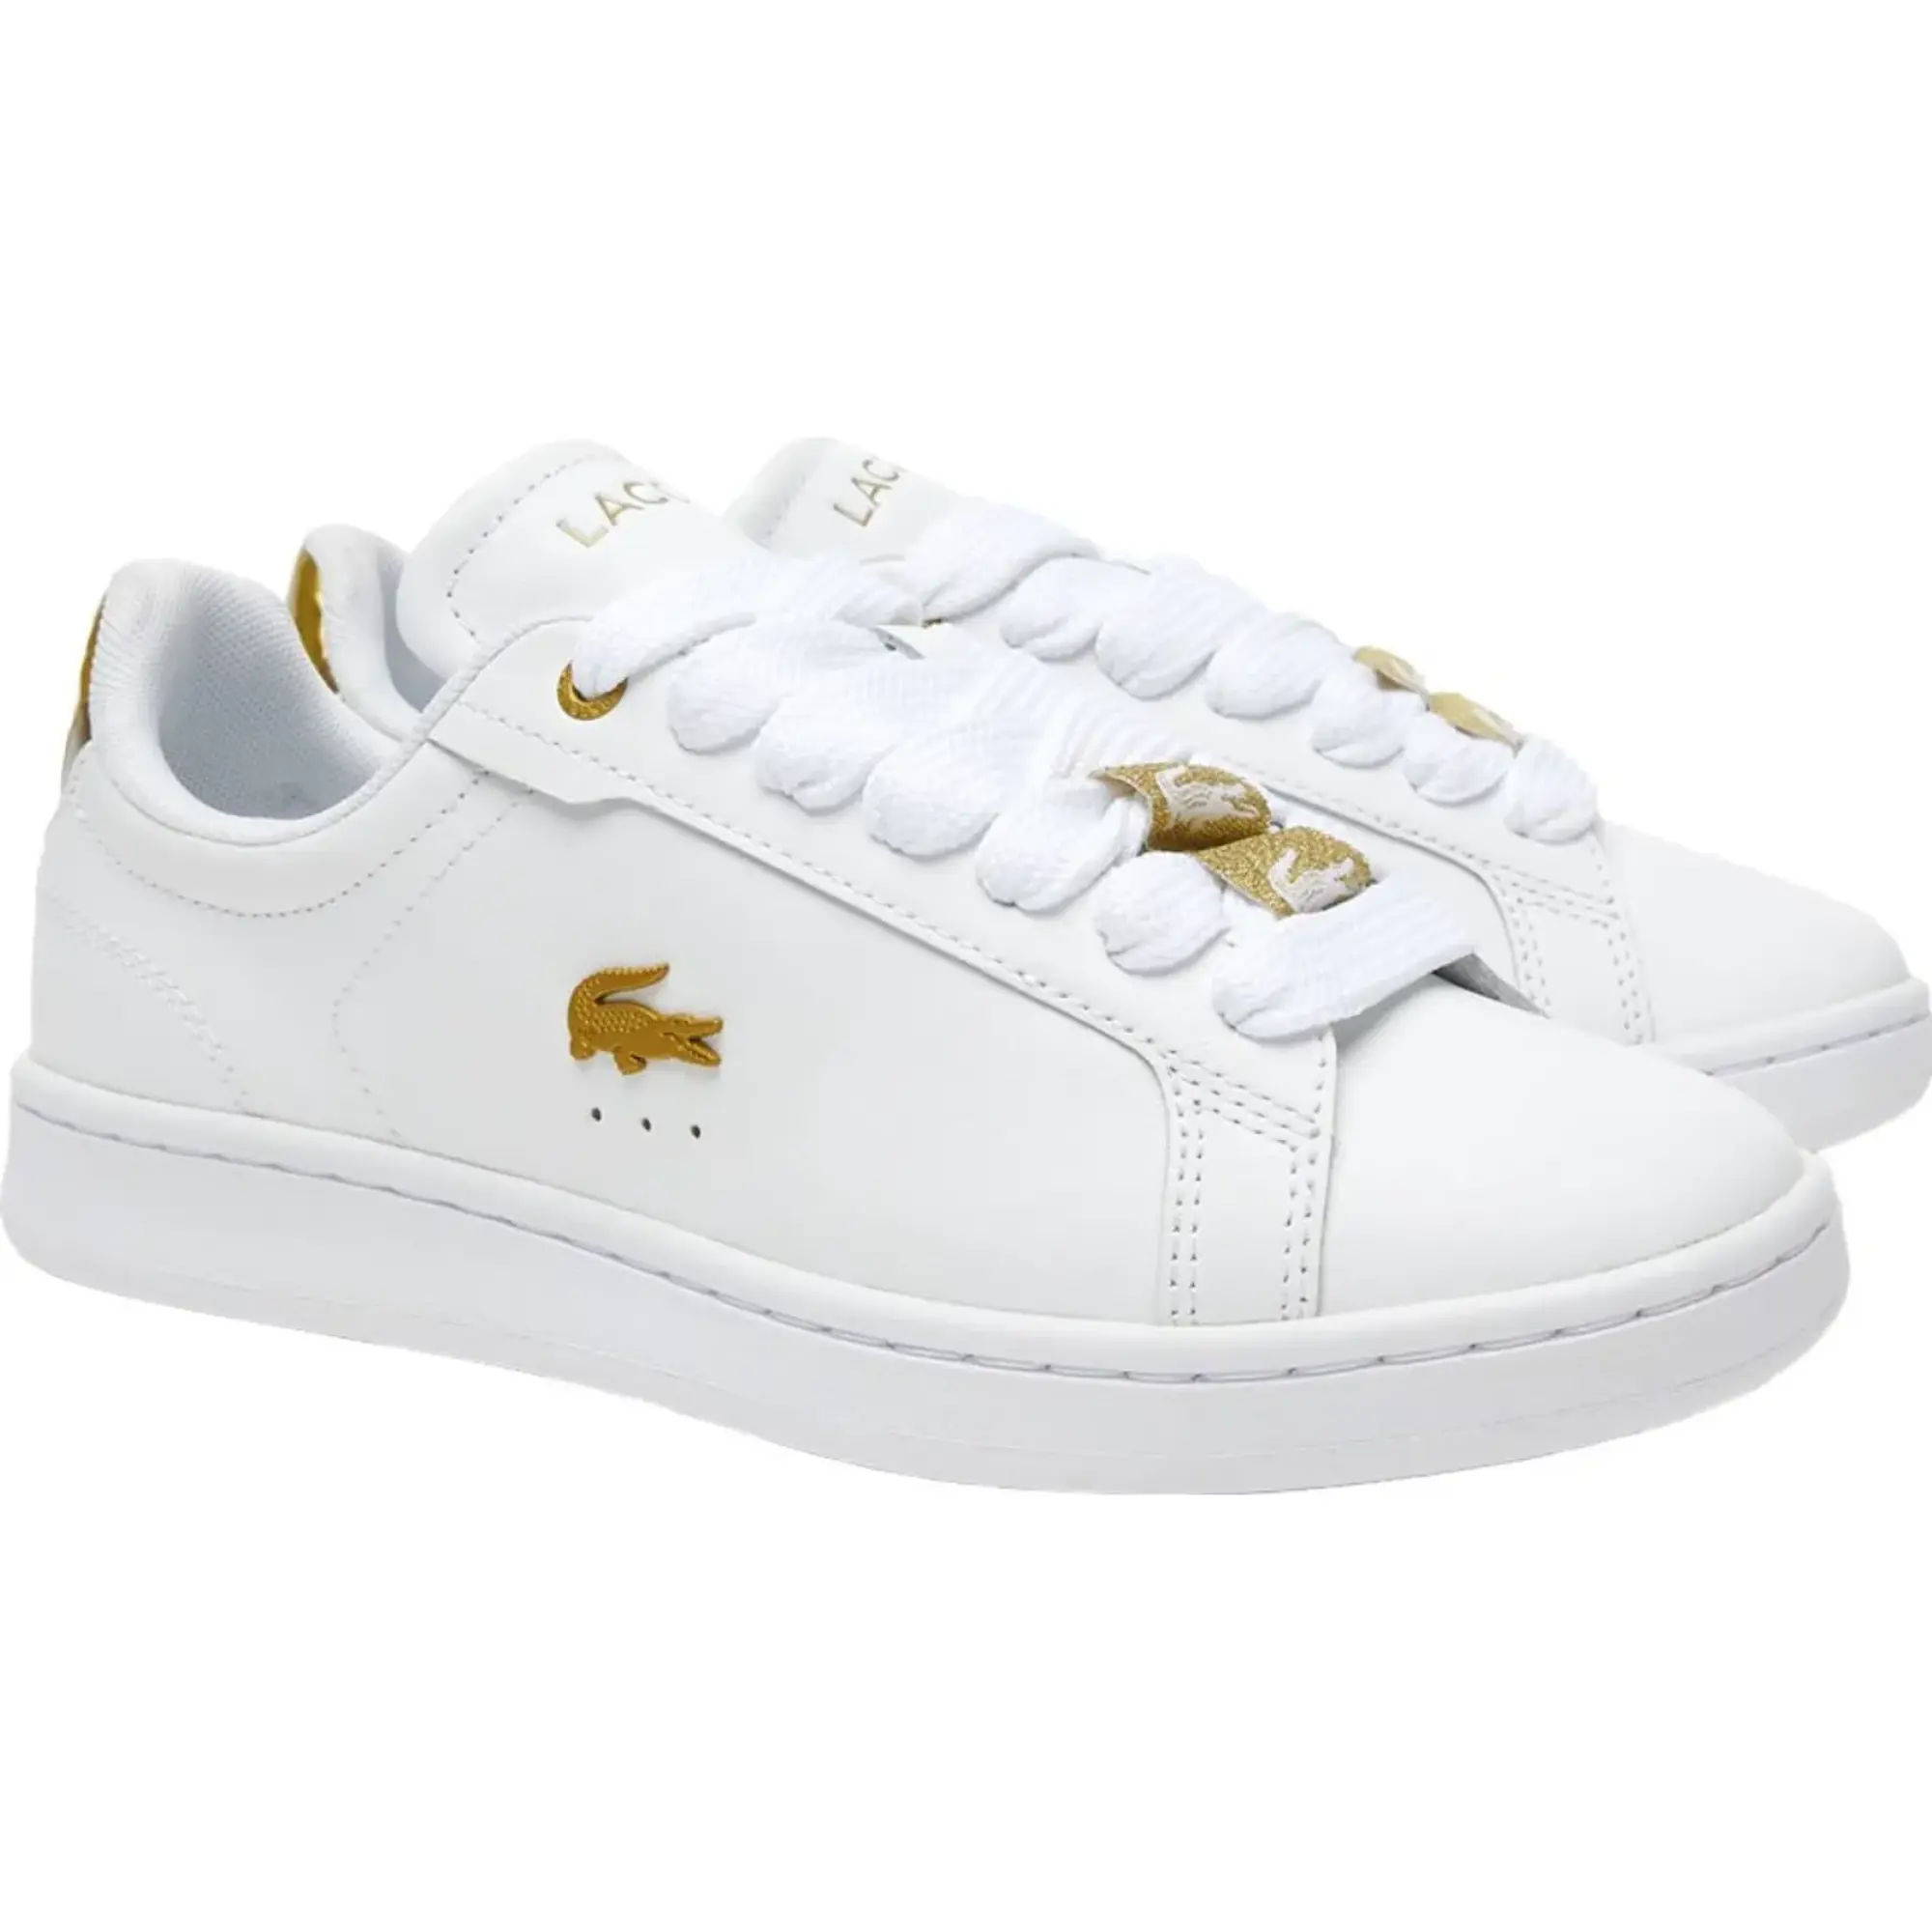 Lacoste carnaby pro leather trainers in white & gold